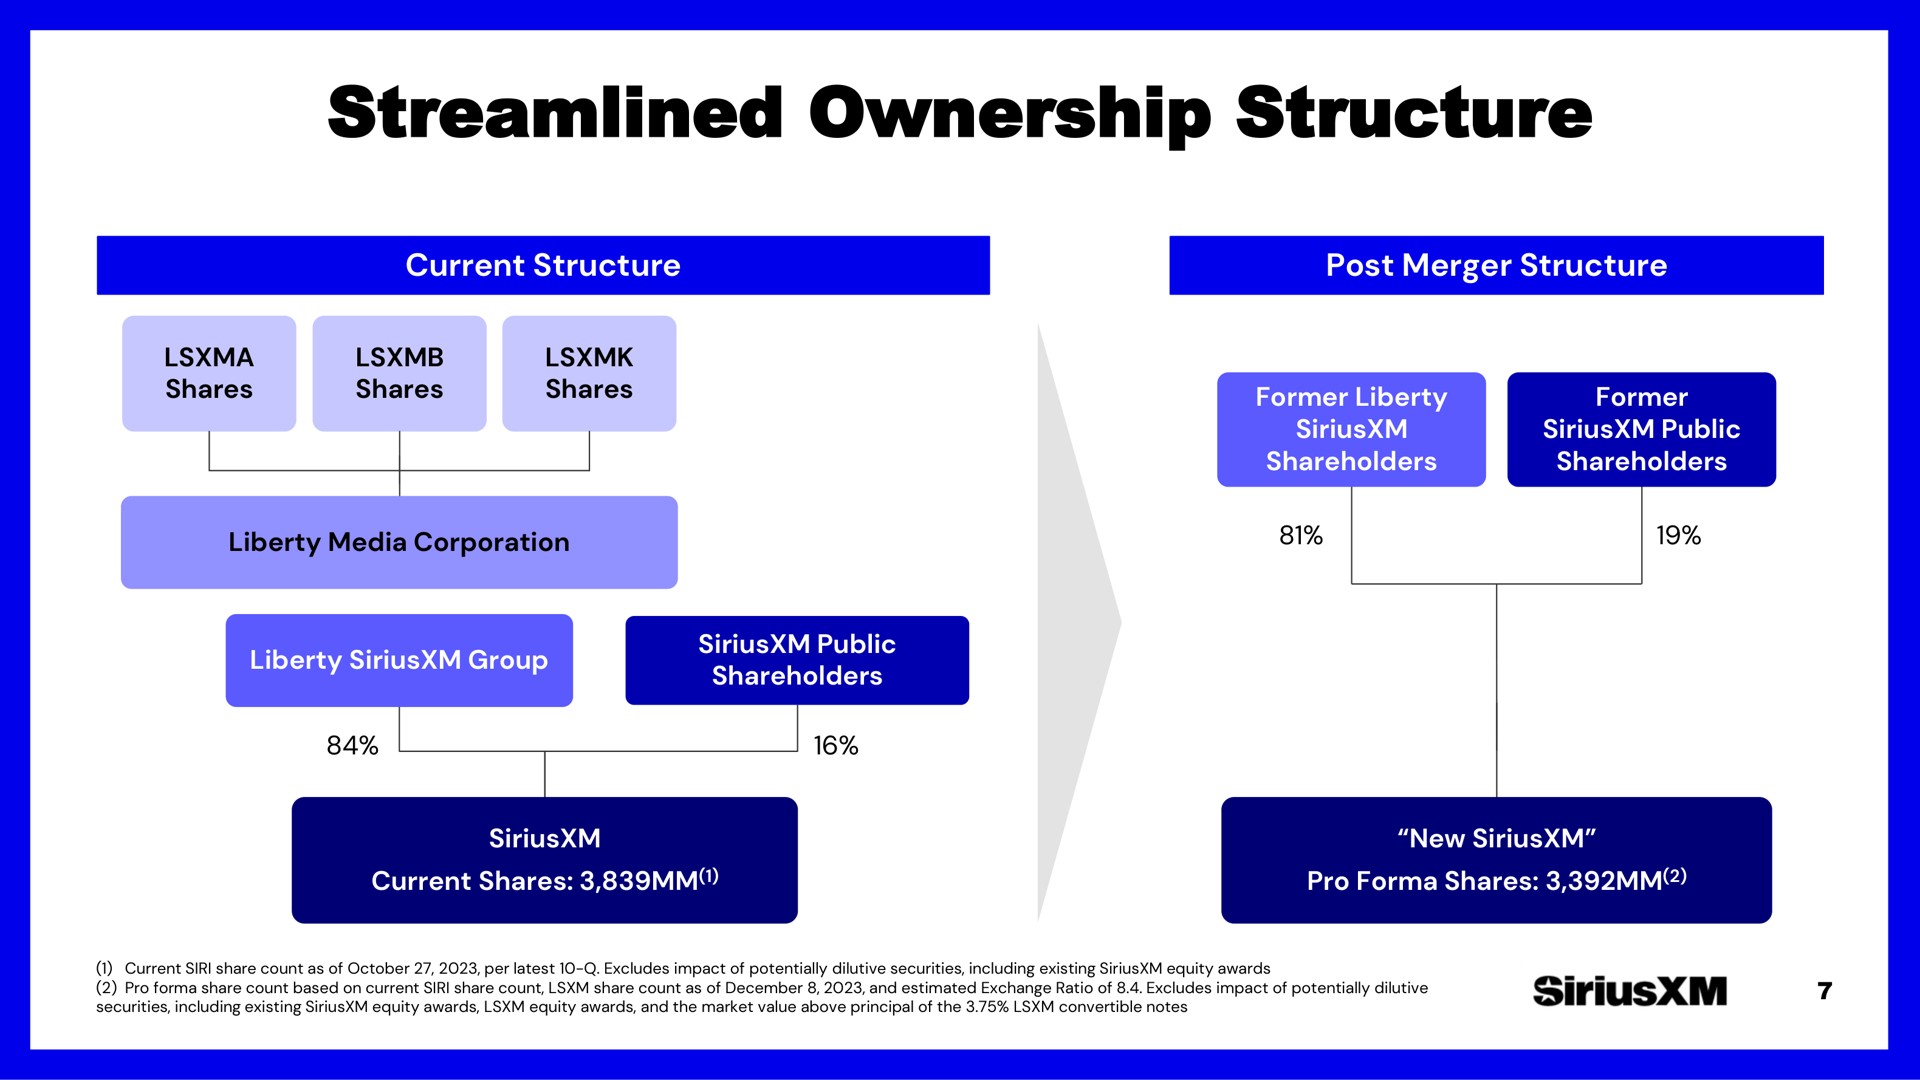 streamlined ownership structure | SiriusXM